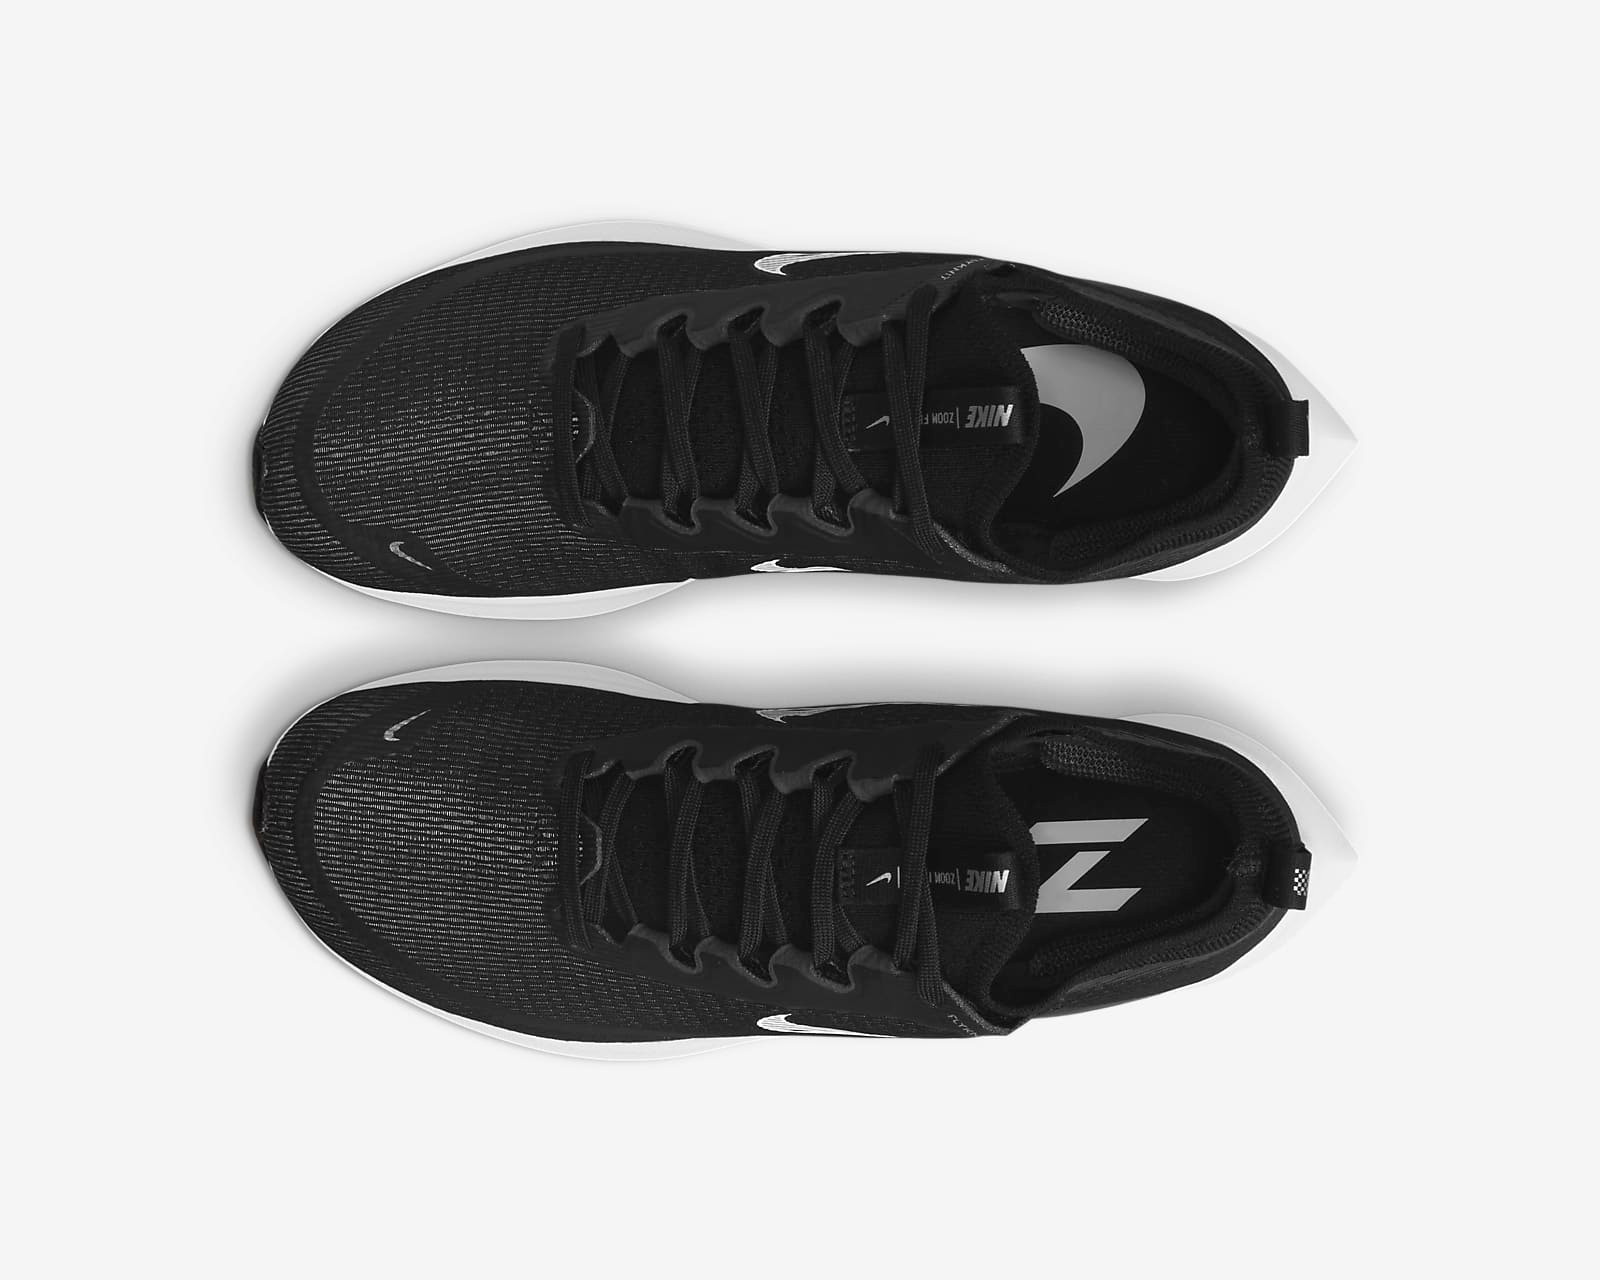 NwfpsShops - Nike wmns free metcon black women cross training running cz0596-010 - 001 - Nike Fly 4 Black Off Noir Anthracite White CT2401